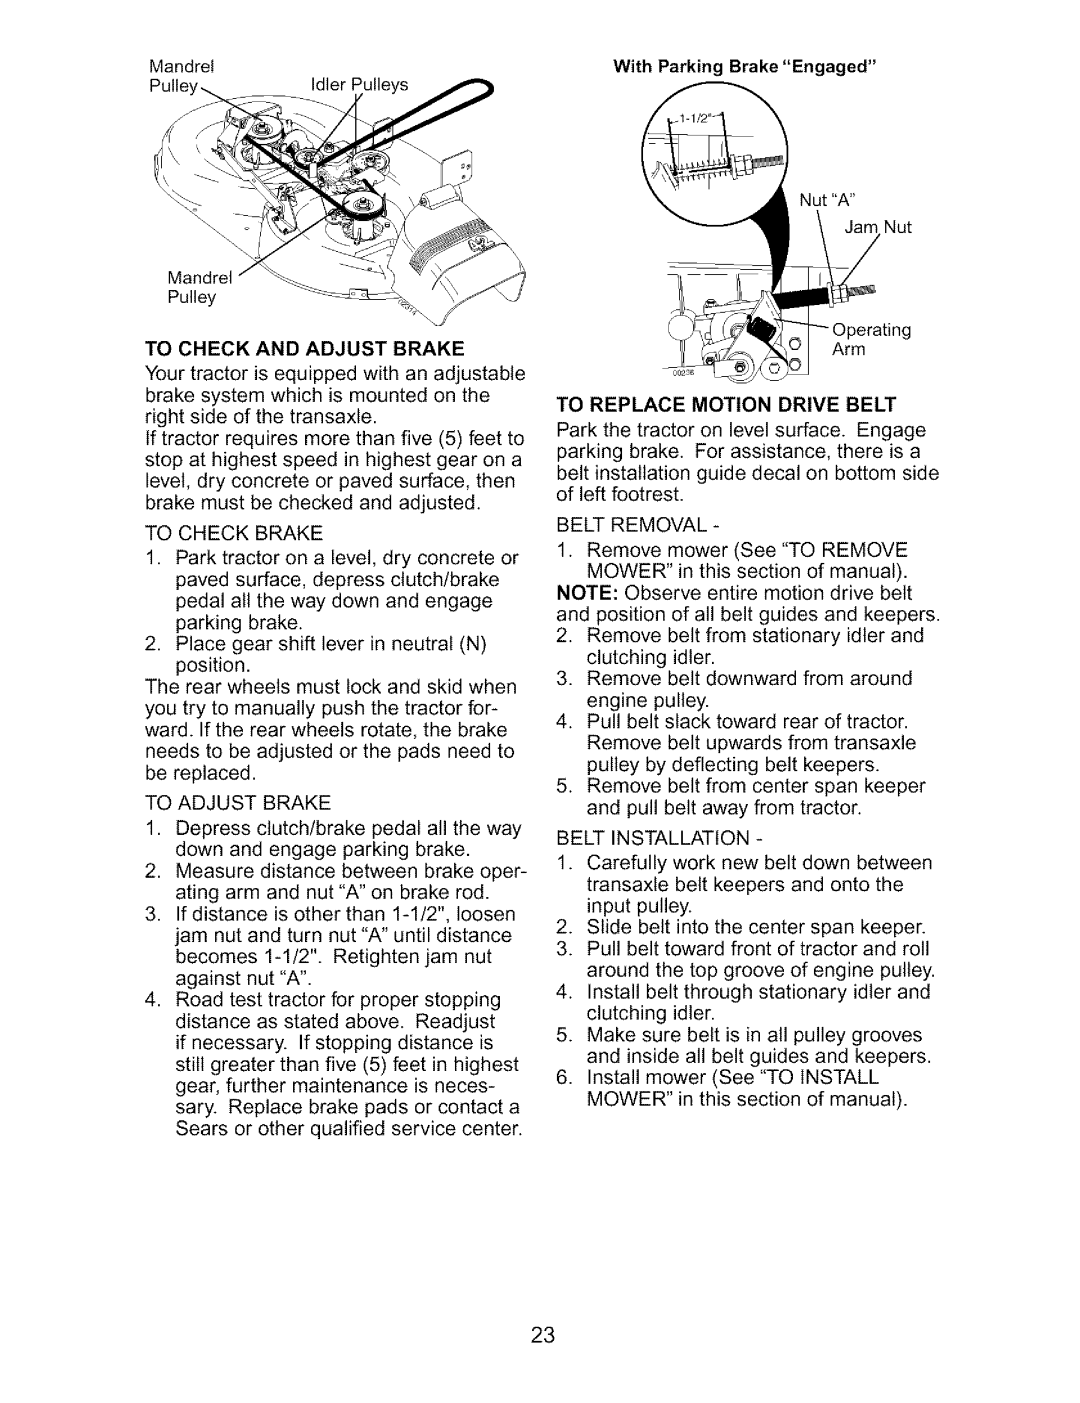 Craftsman 917.27317 owner manual To Check And Adjust Brake, With Parking Brake Engaged, To Replace Motion Drive Belt 